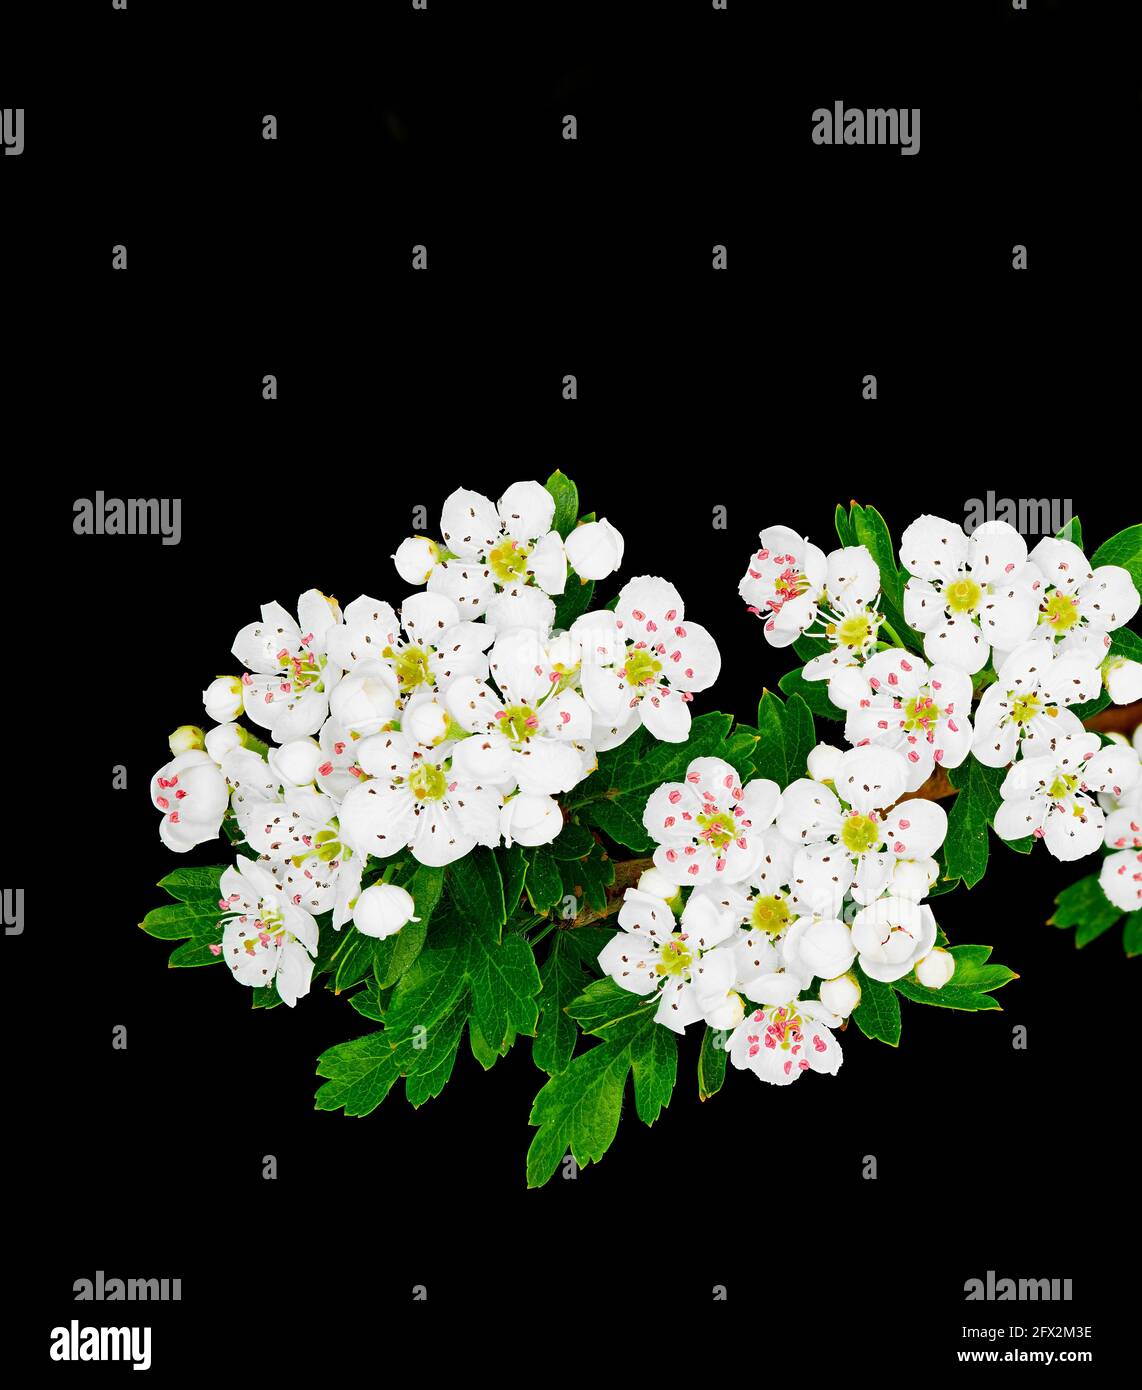 Sprig of hawthorn flowers, also known as May tree, one-seed hawthorn, whitethorn, quickthorn , and crataegus monogyna, is part of the Rosaceae family. Stock Photo